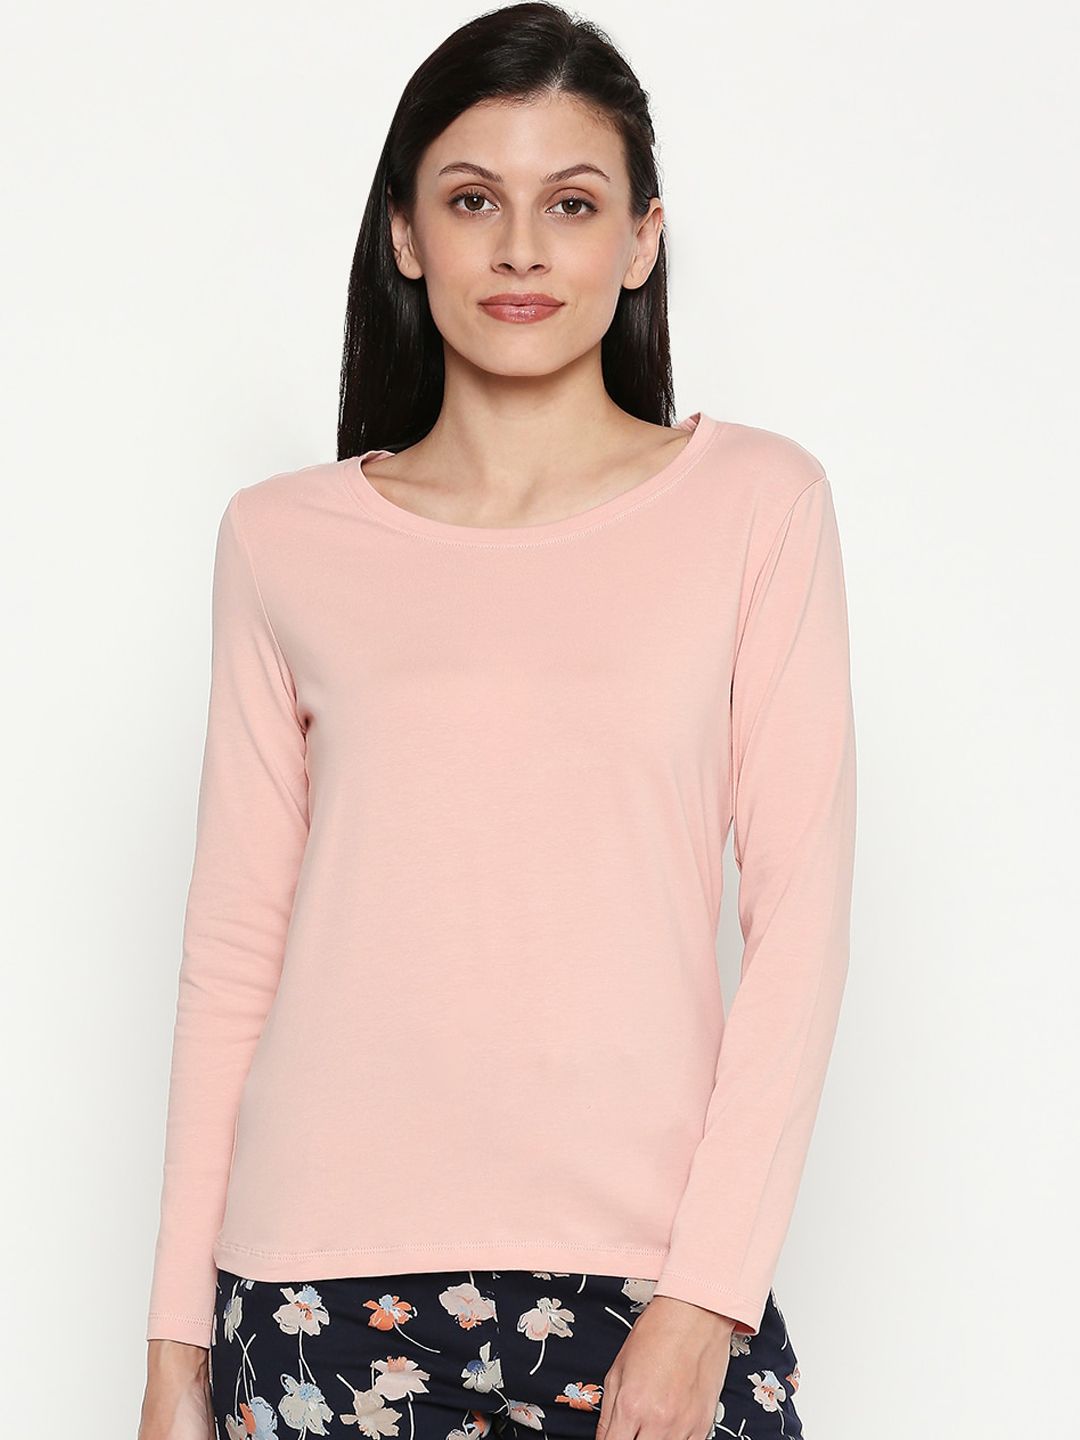 Dreamz by Pantaloons Women Pink Solid Lounge tshirt Price in India